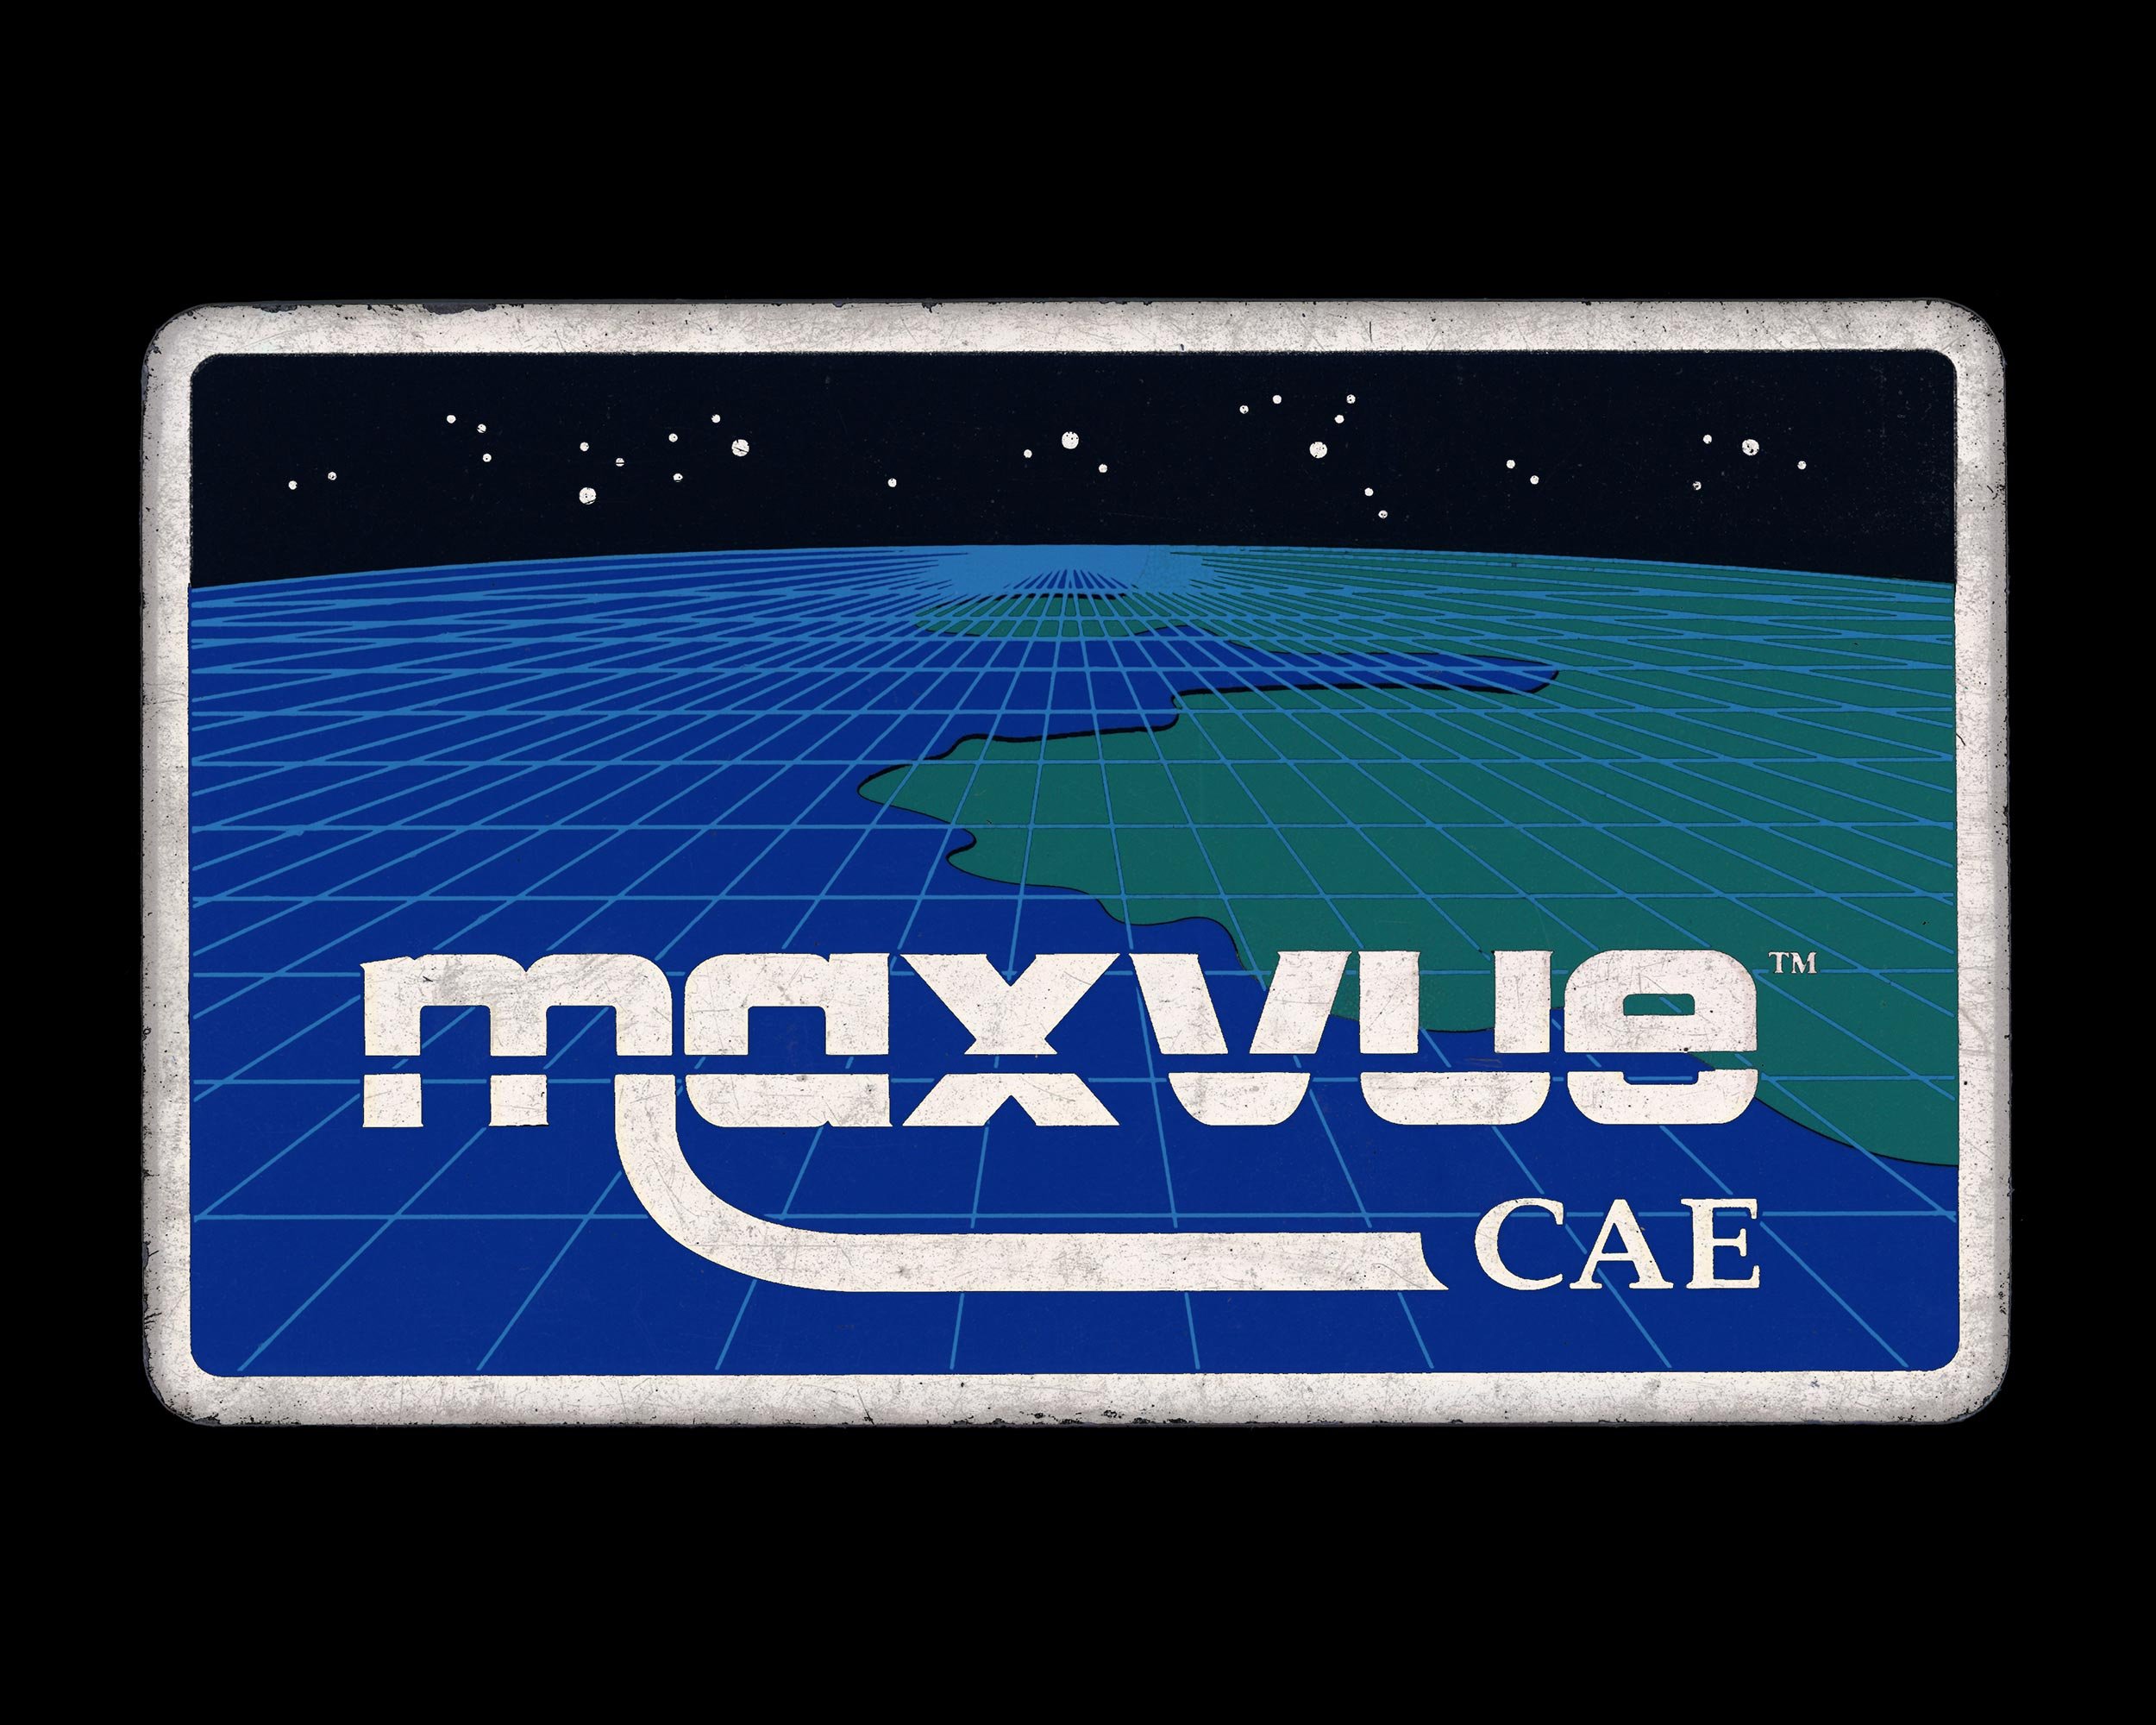  CAE MAXVUE sticker. Image from artist’s collection. 